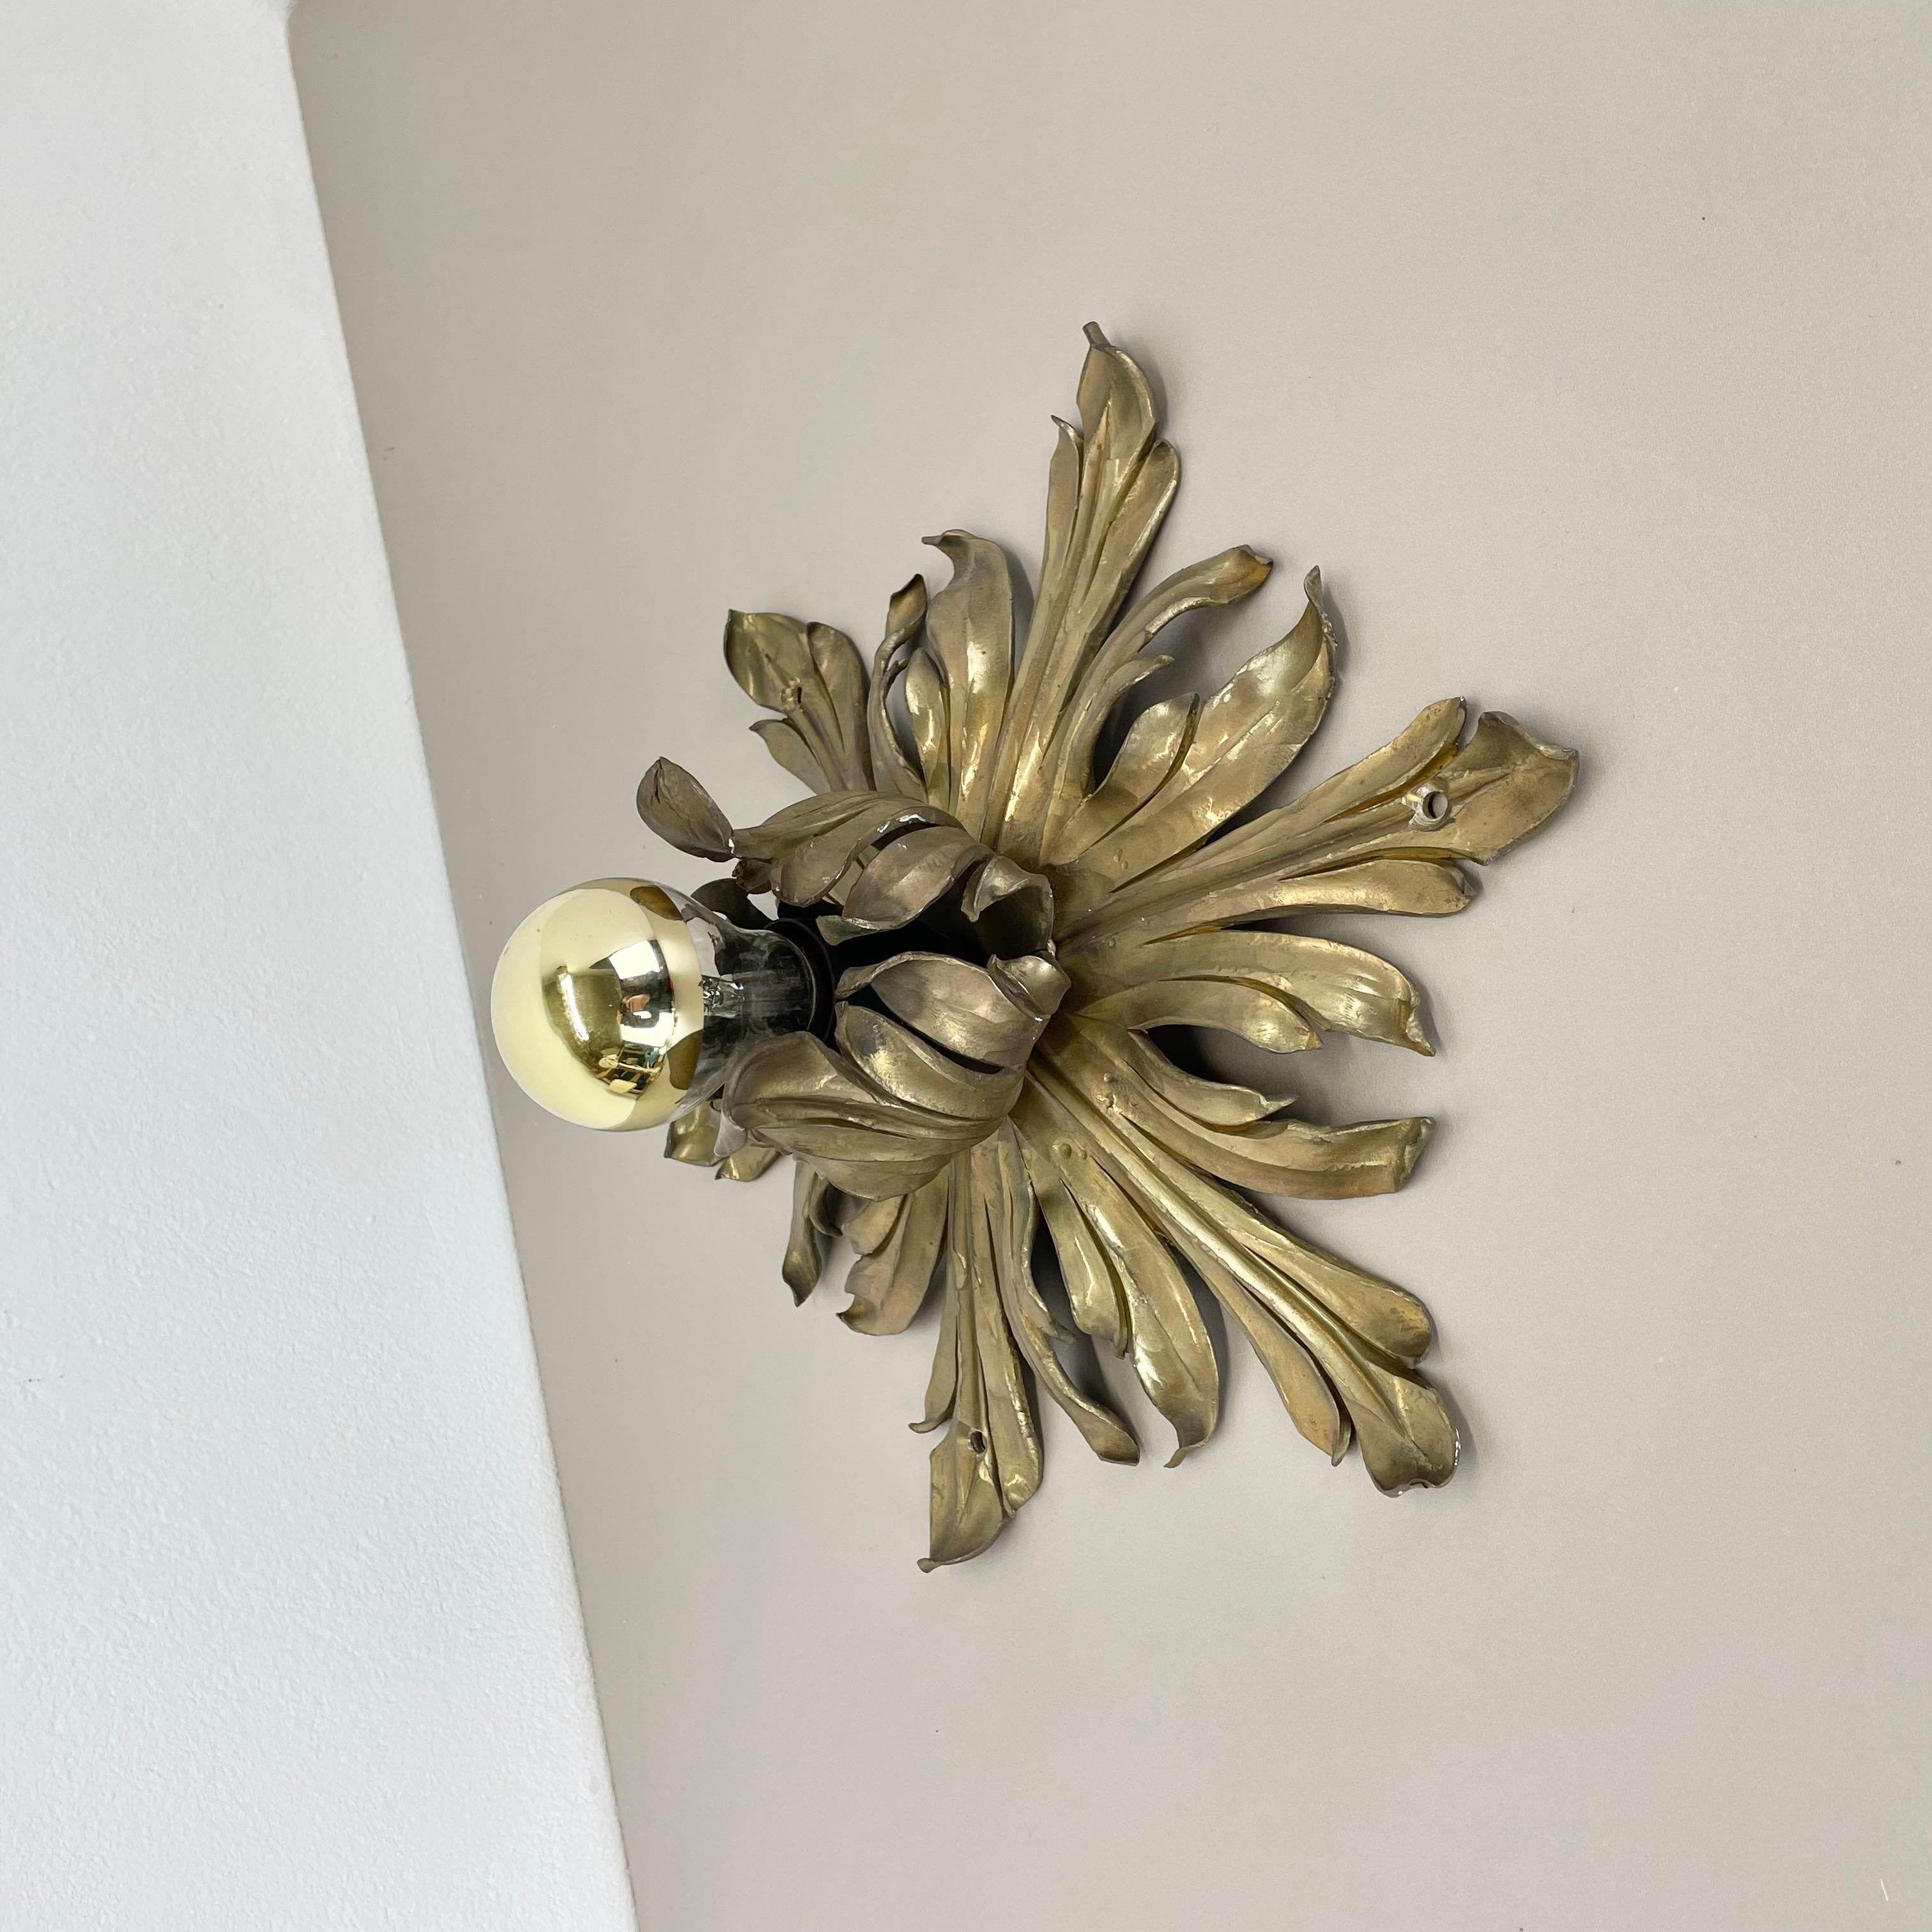 35cm handmade Brass Stilnovo Style Floral Theatre Wall Ceiling Light, Italy 1970 In Good Condition For Sale In Kirchlengern, DE